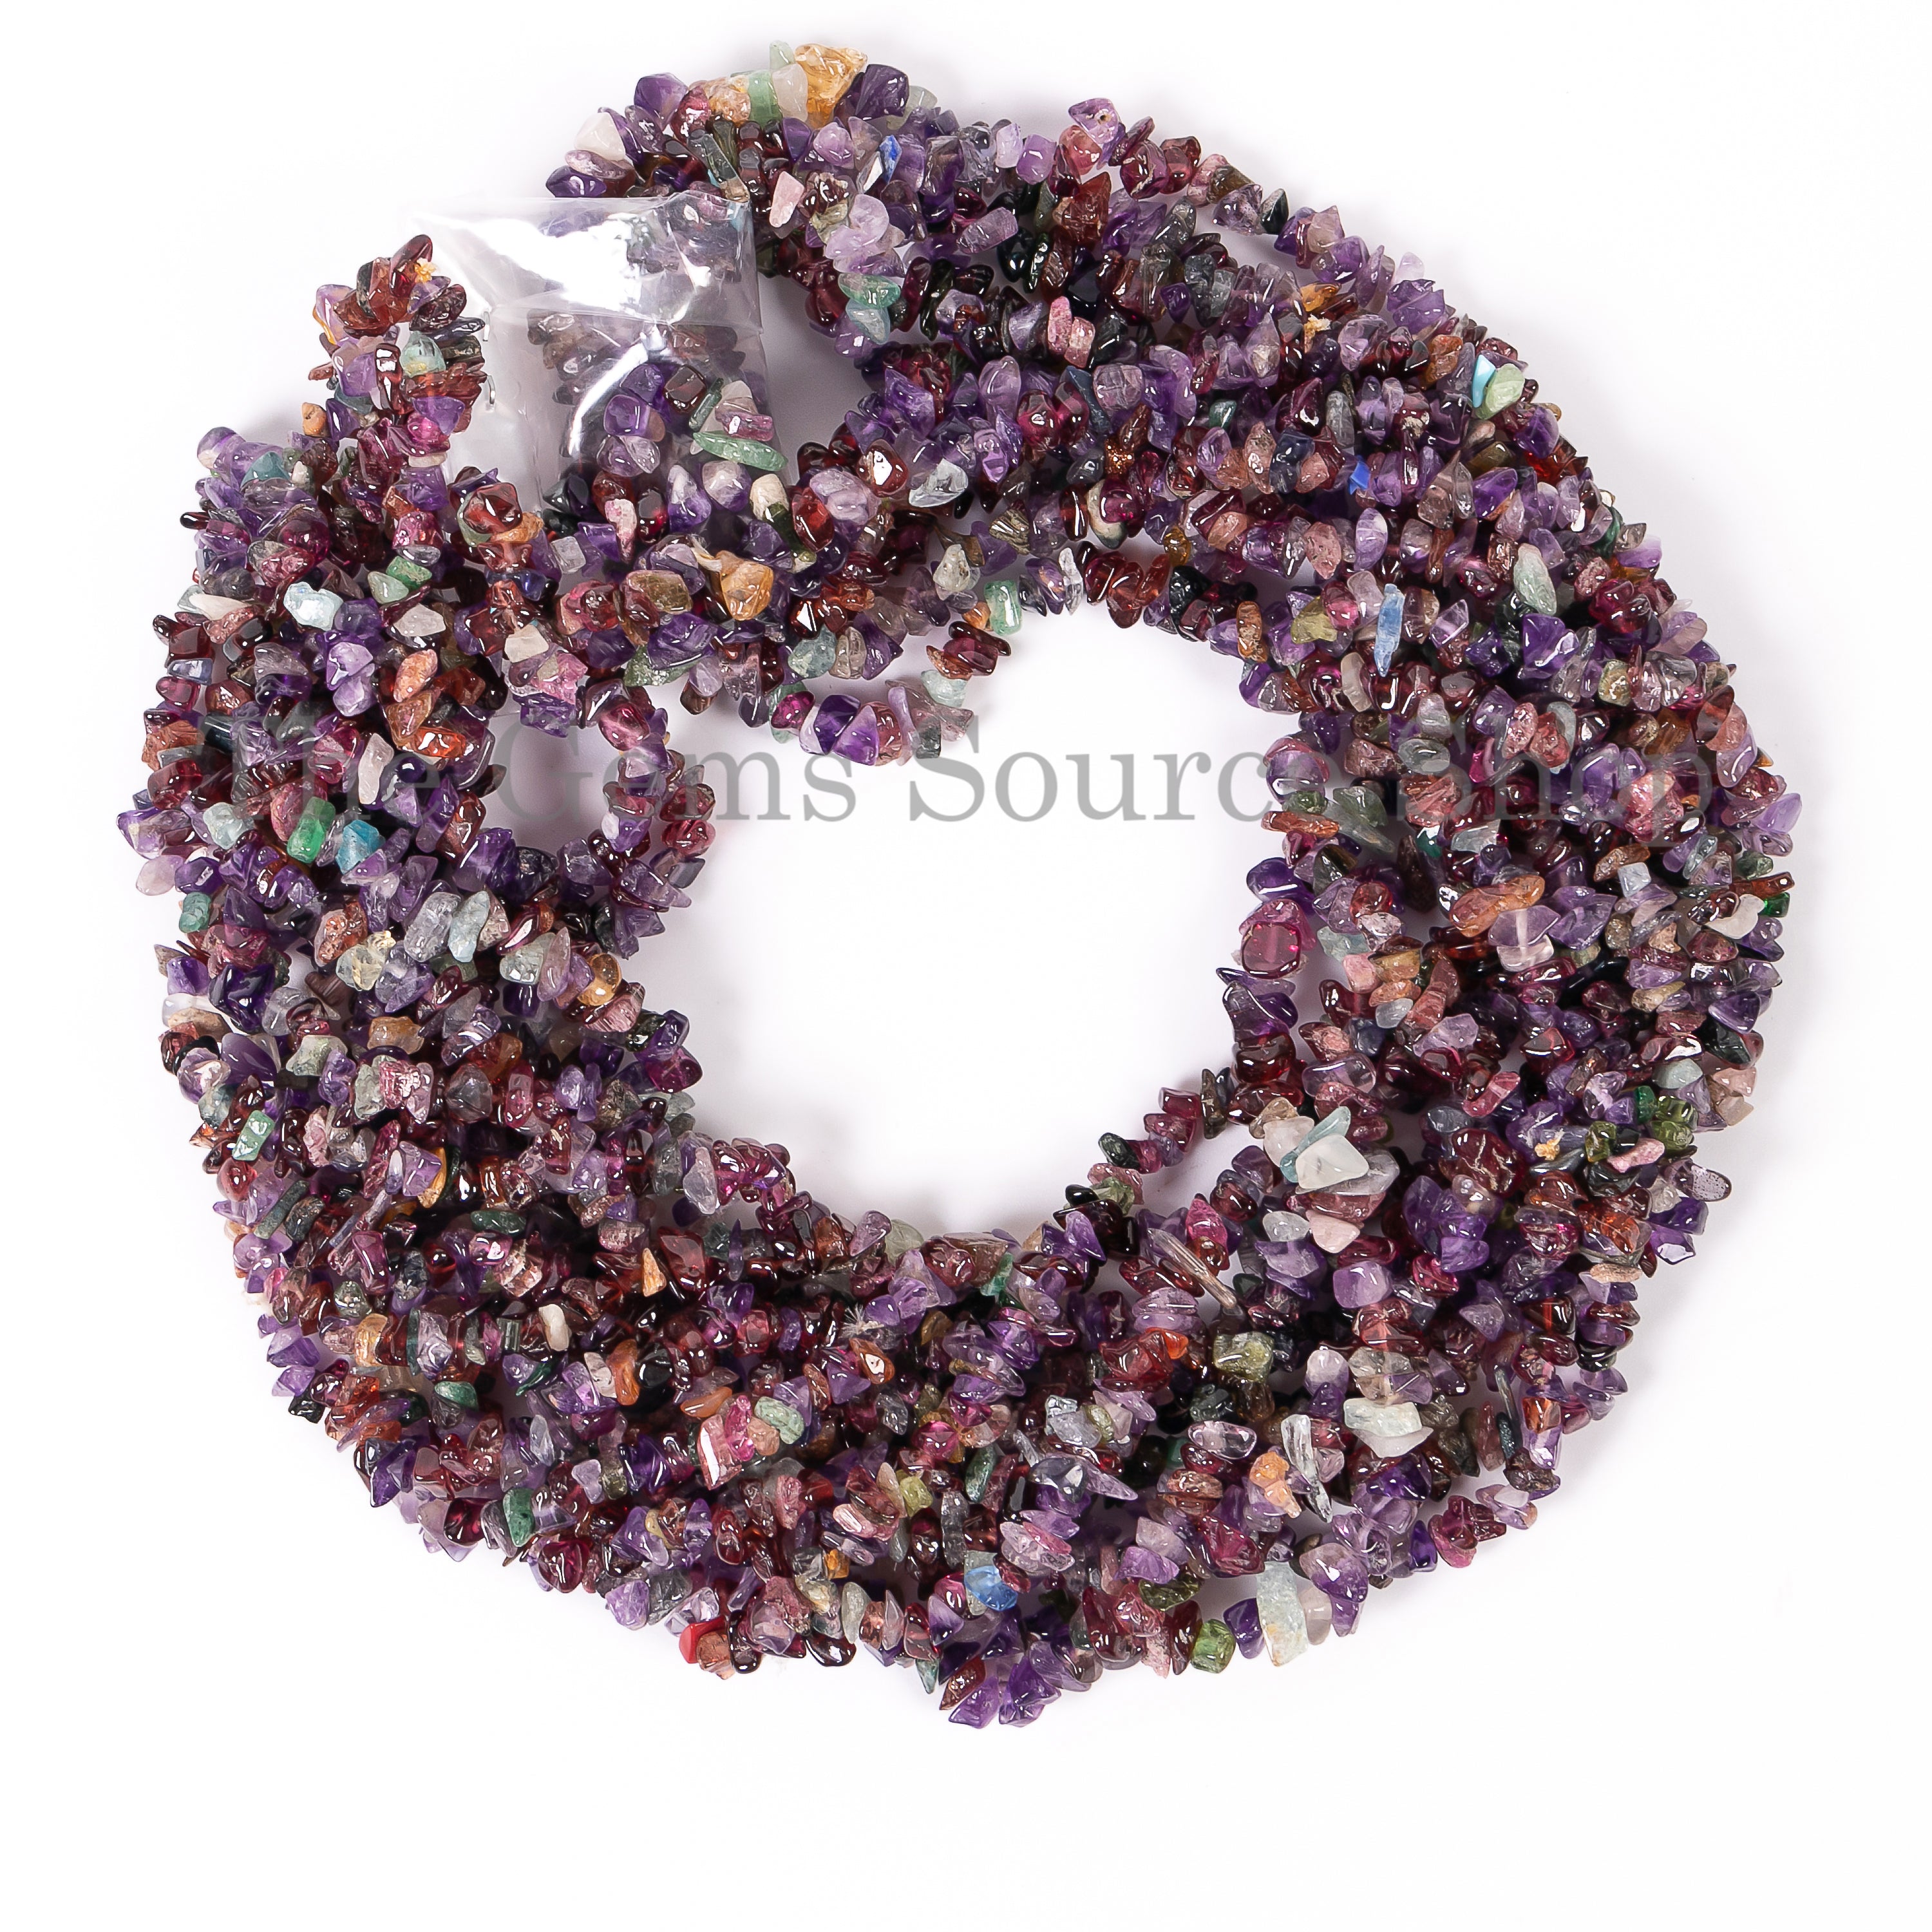 Multi Gemstone Smooth Chips Nuggets Beads TGS-4695